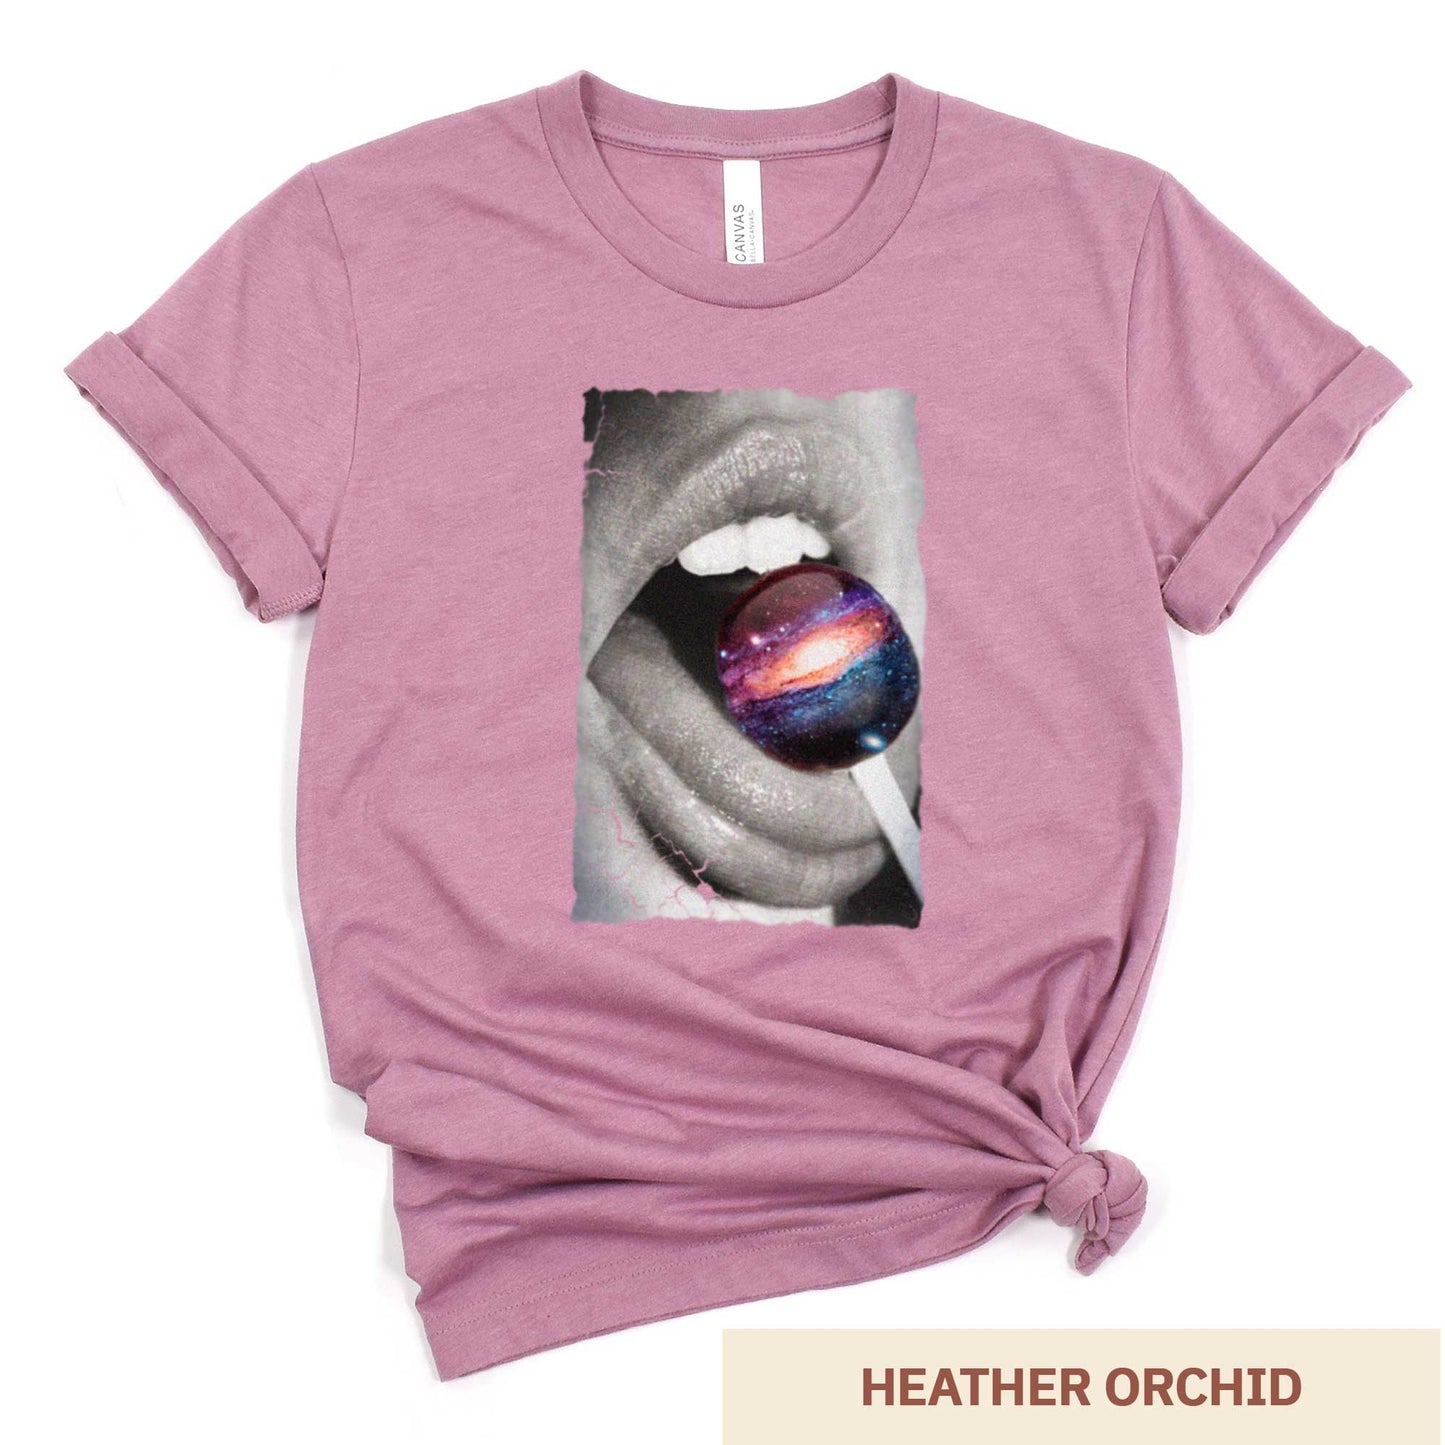 A heather orchid Bella Canvas t-shirt with a black and white image of a woman's mouth eating a lollipop that looks like a swirling galaxy.